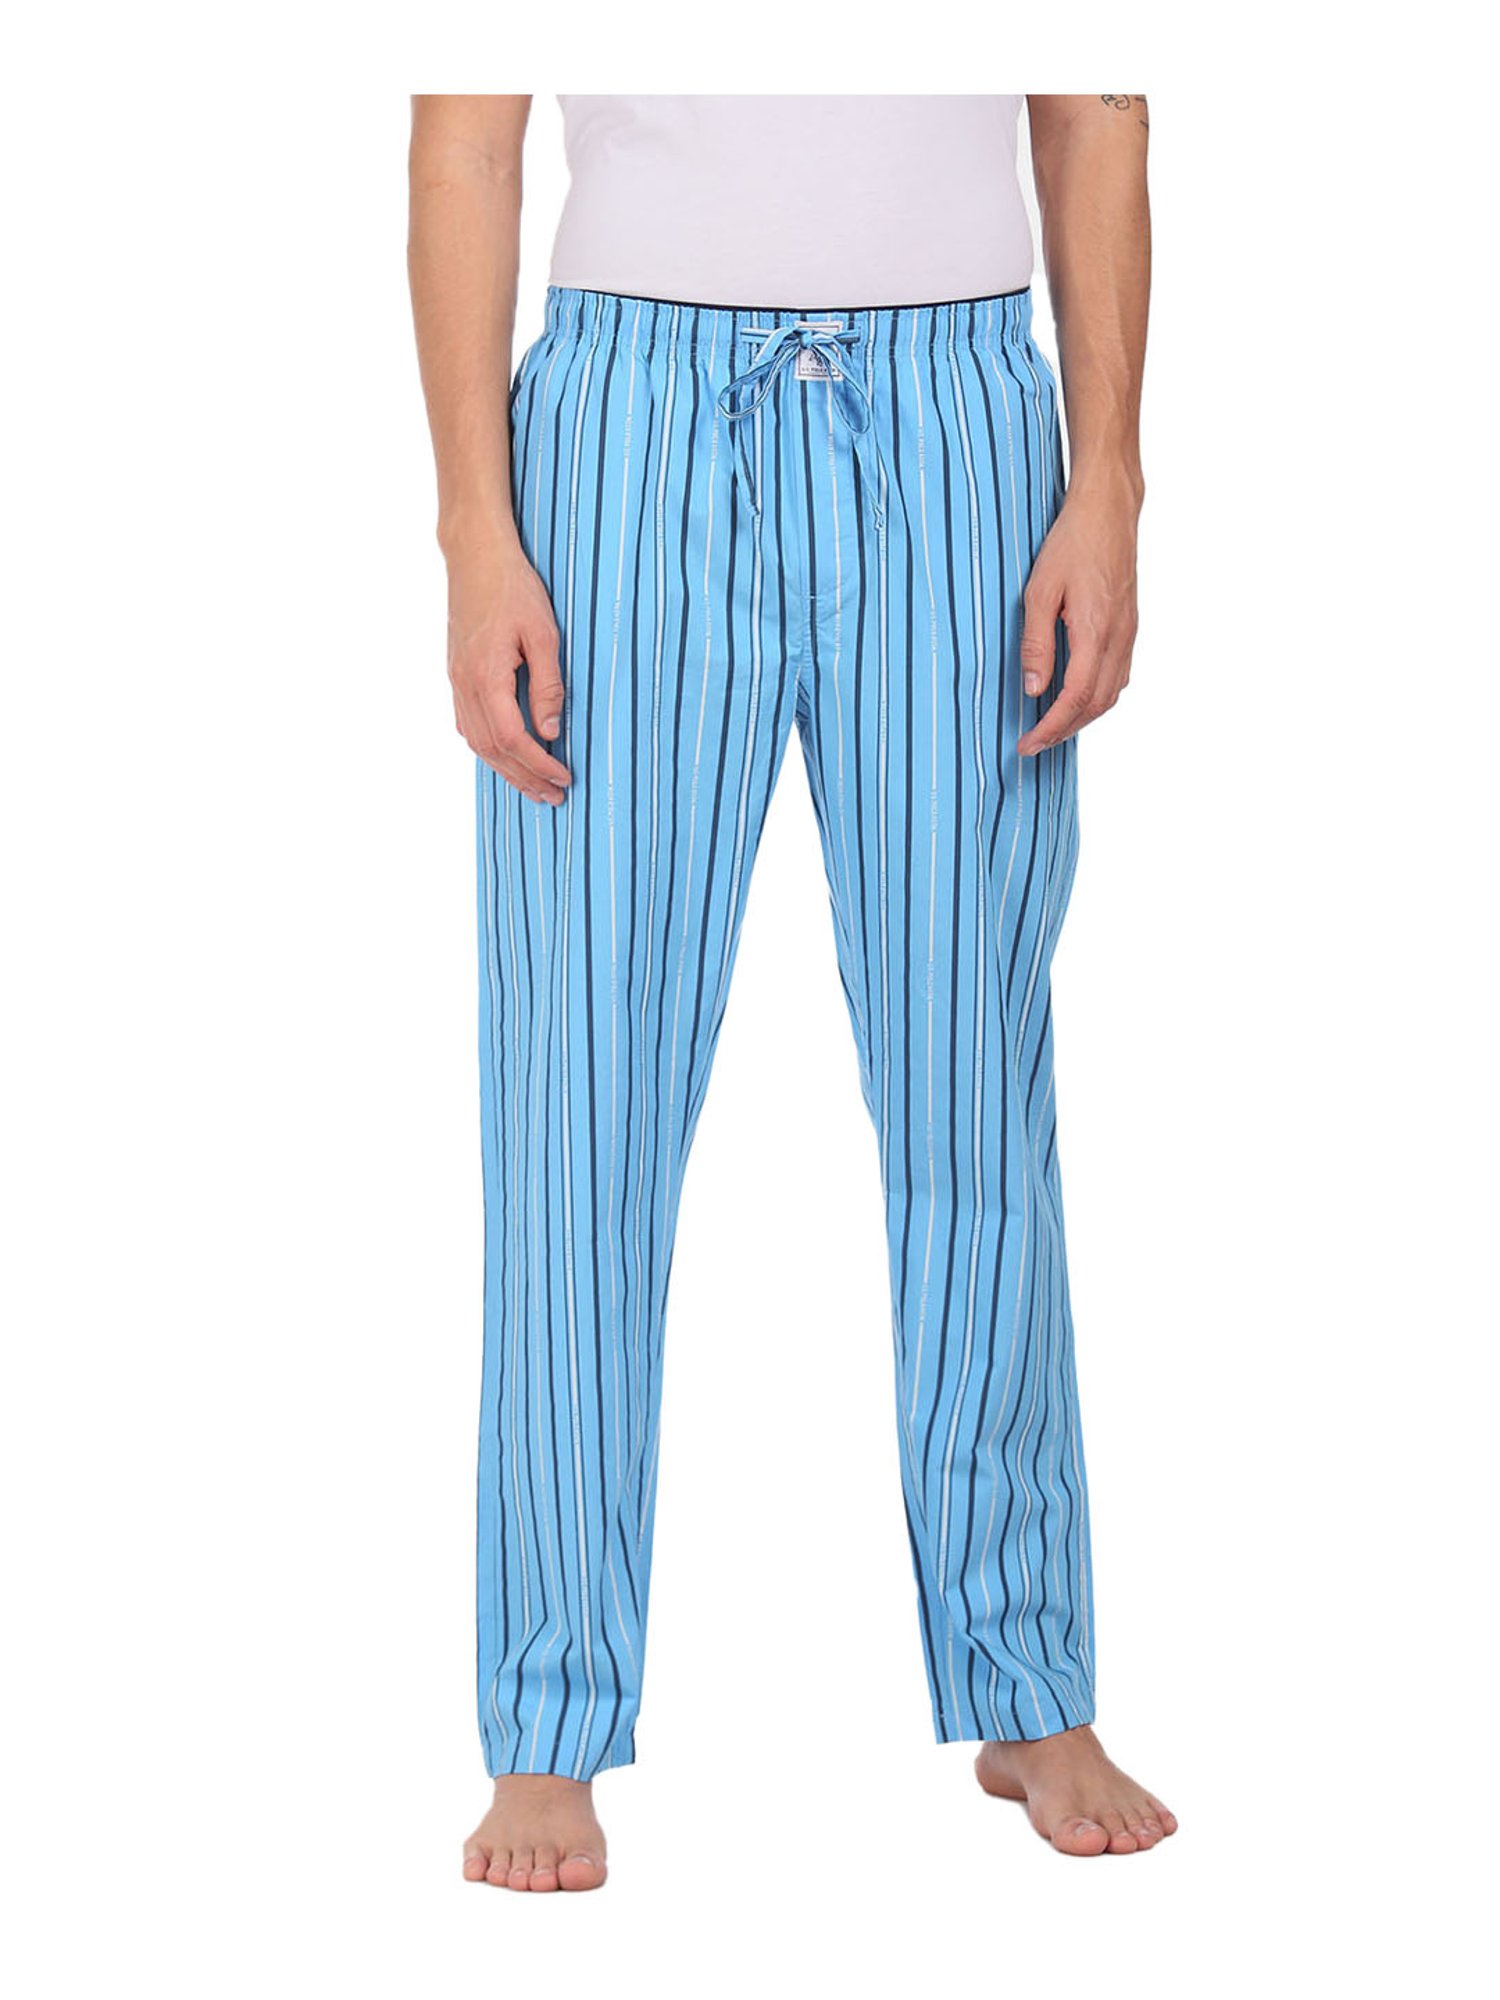 UFO NEPAL  Rs 2288 Item Code 88781 Mens US Polo Assn Lounge Pants  Available Colors Black Red and Blue Printed Color Available Size S M L  Location Kumaripati Maharajgunj Baneshwor City Center  Facebook